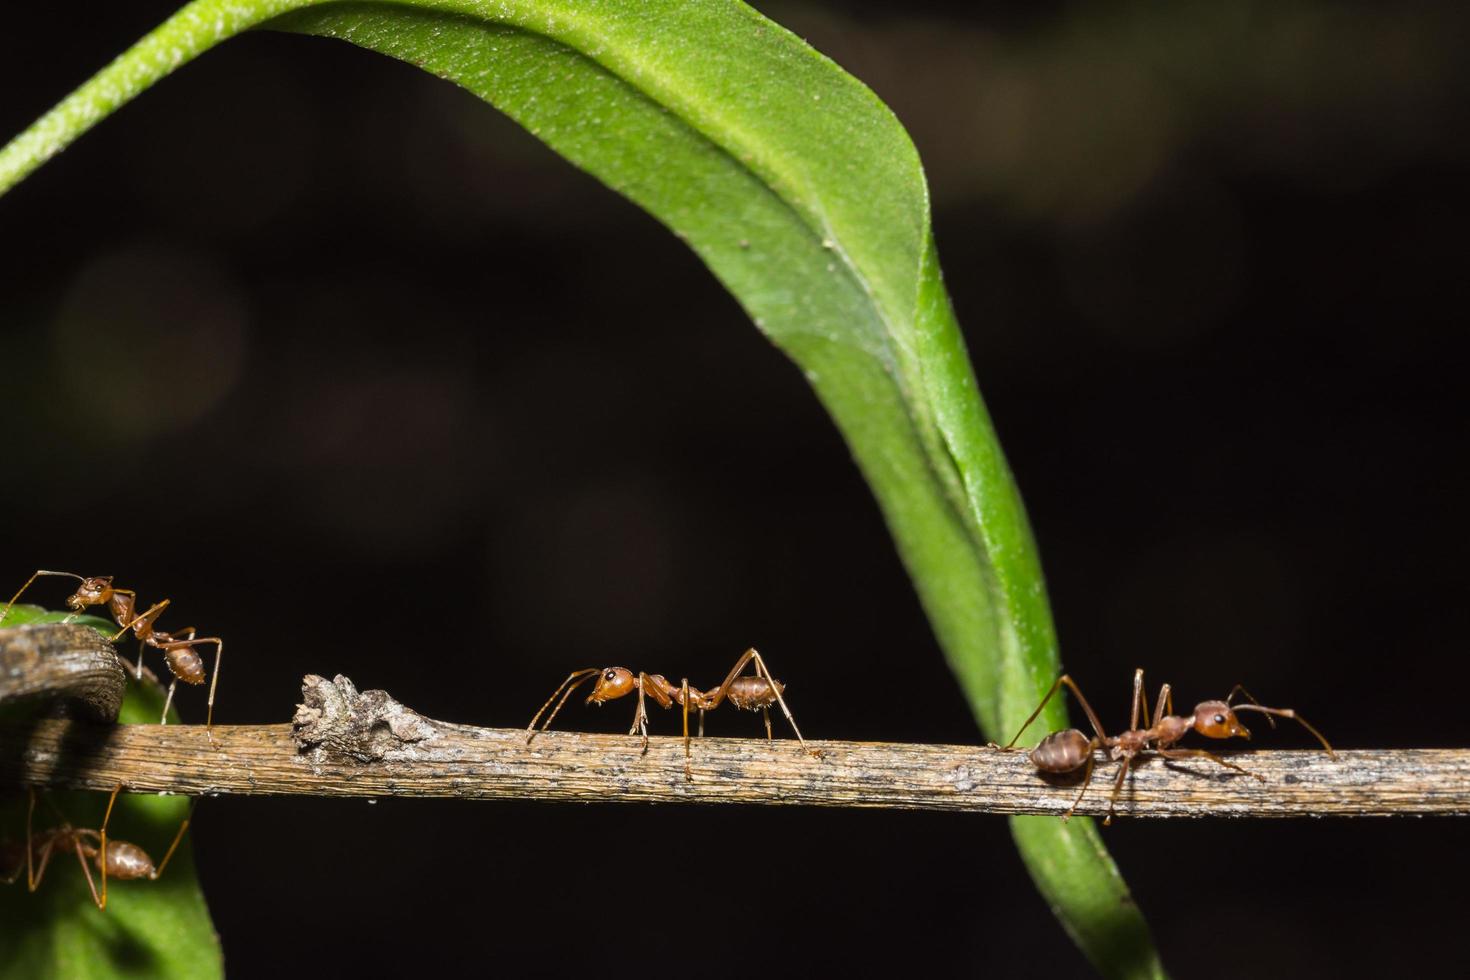 Red ants on a plant photo